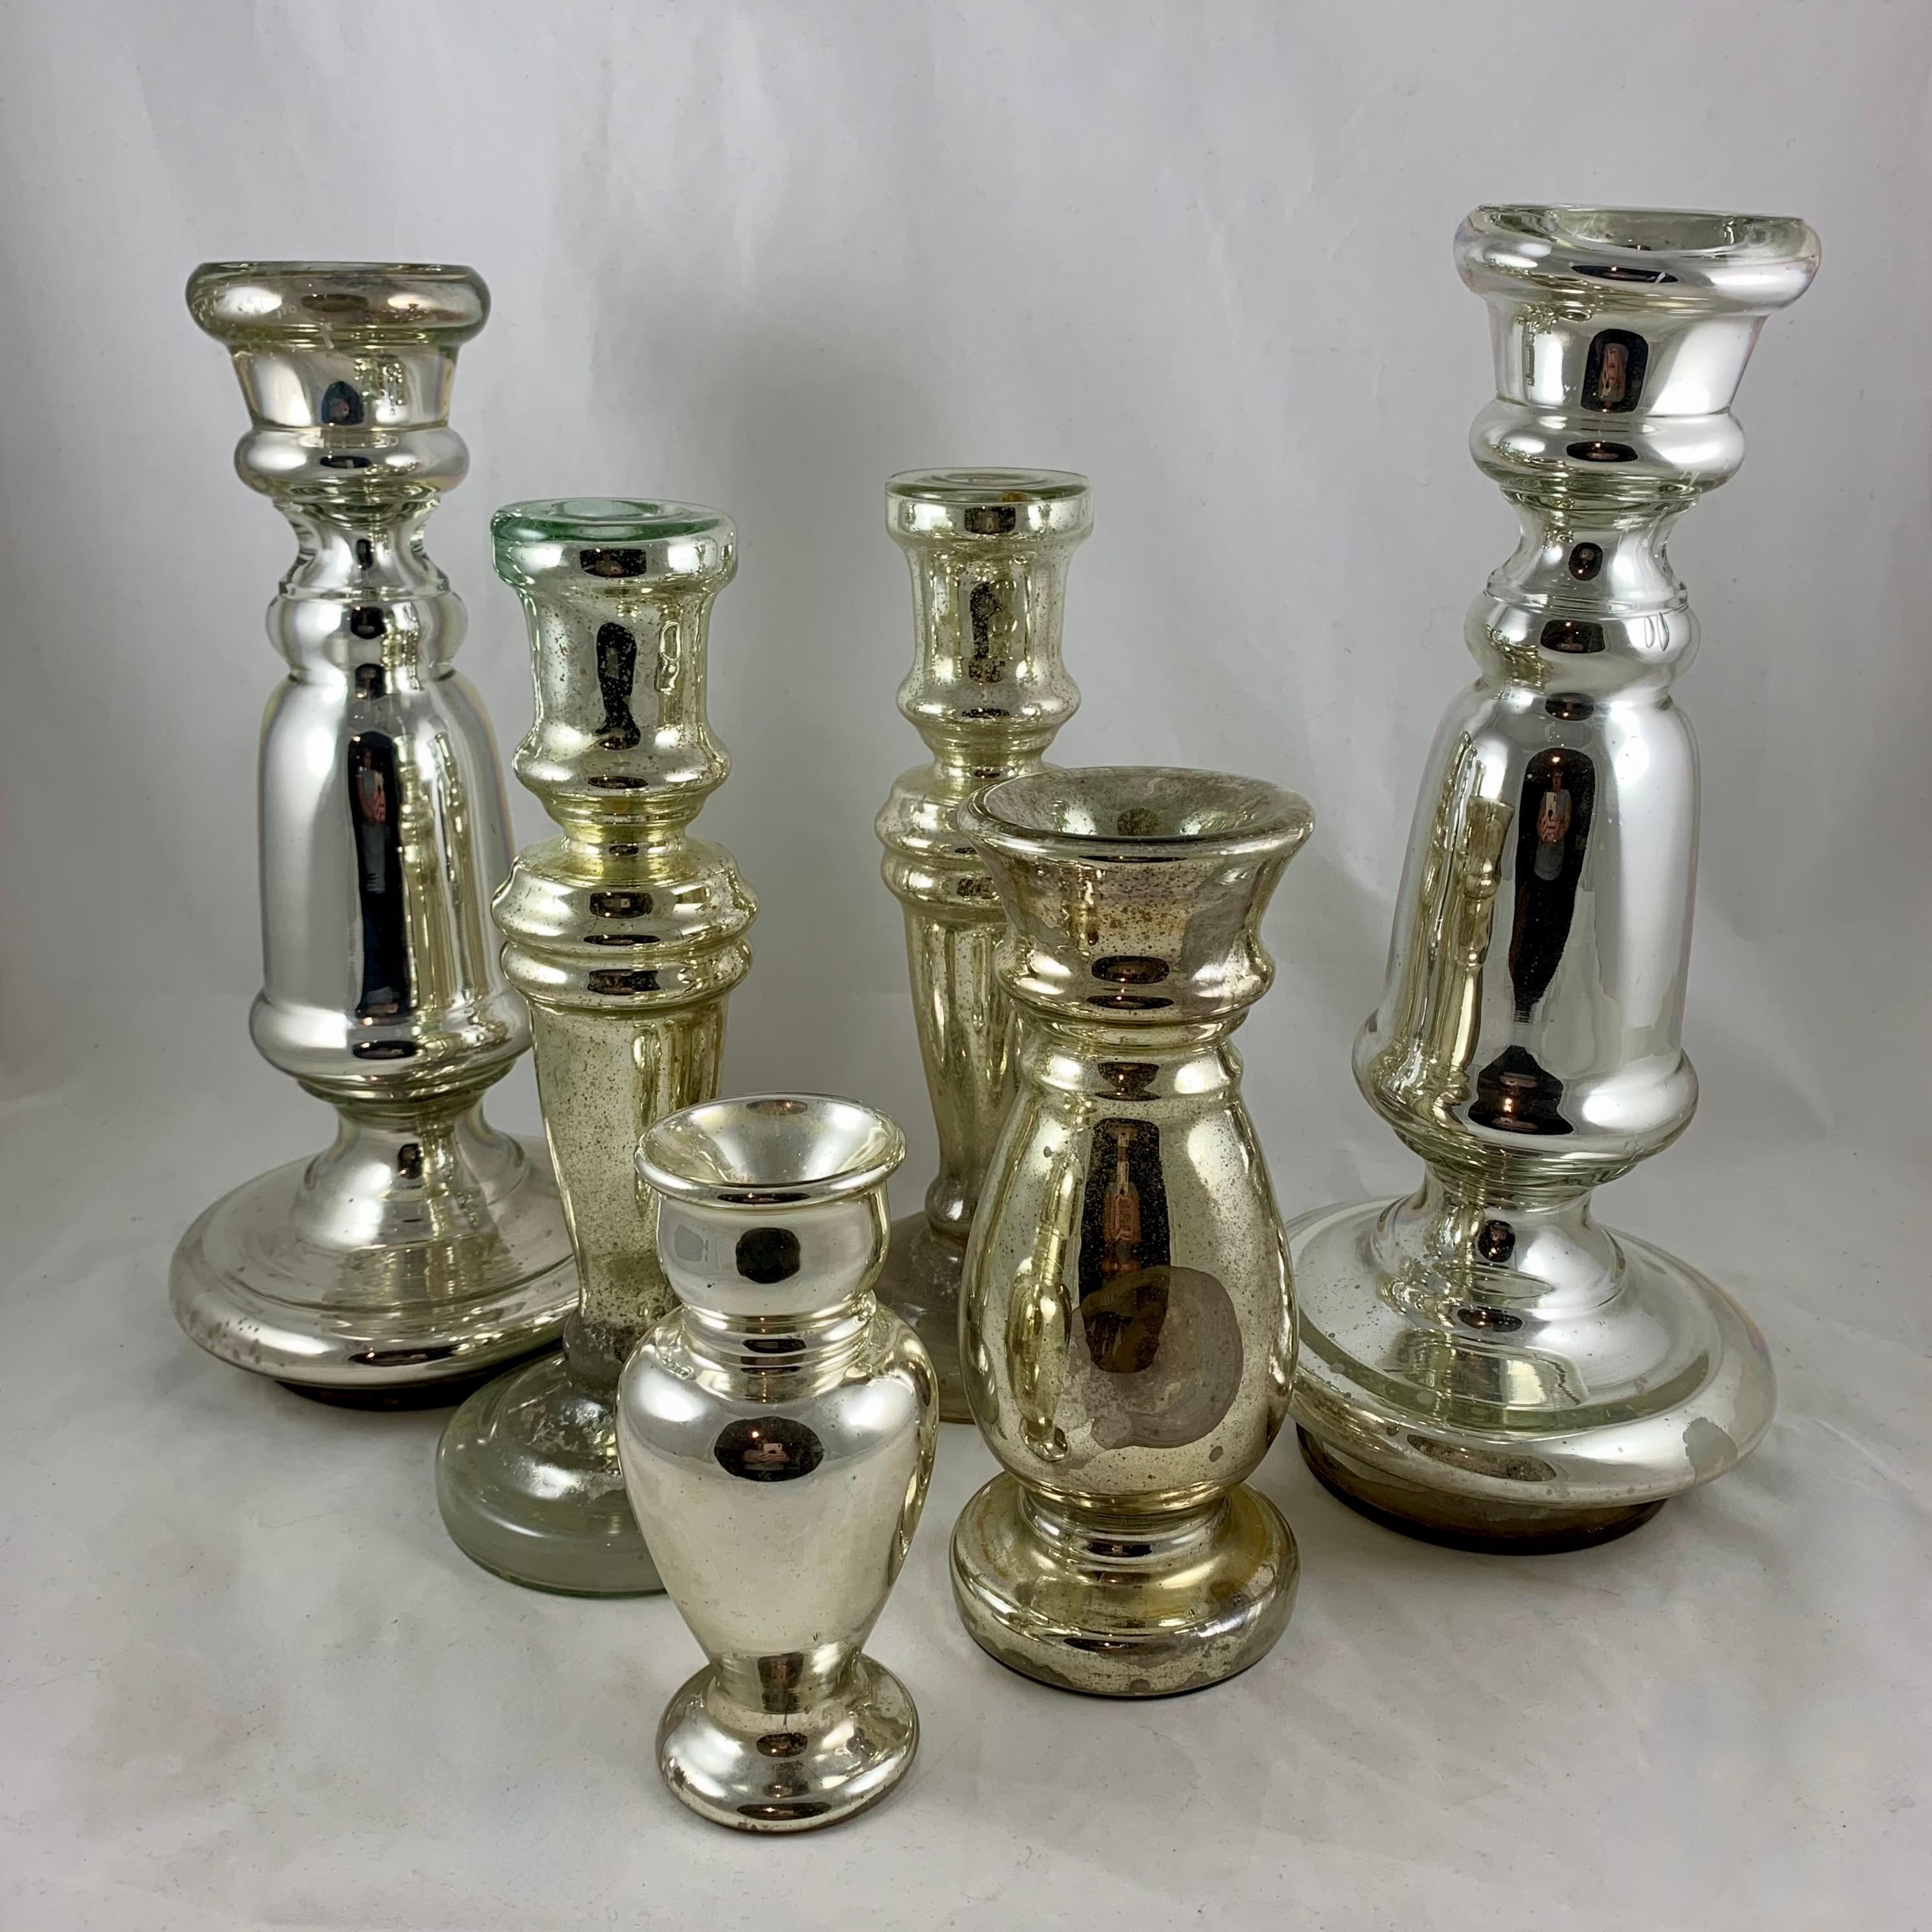 International Style English Blown Mercury Glass Silvered Candlesticks, Collection of Six, circa 1850 For Sale